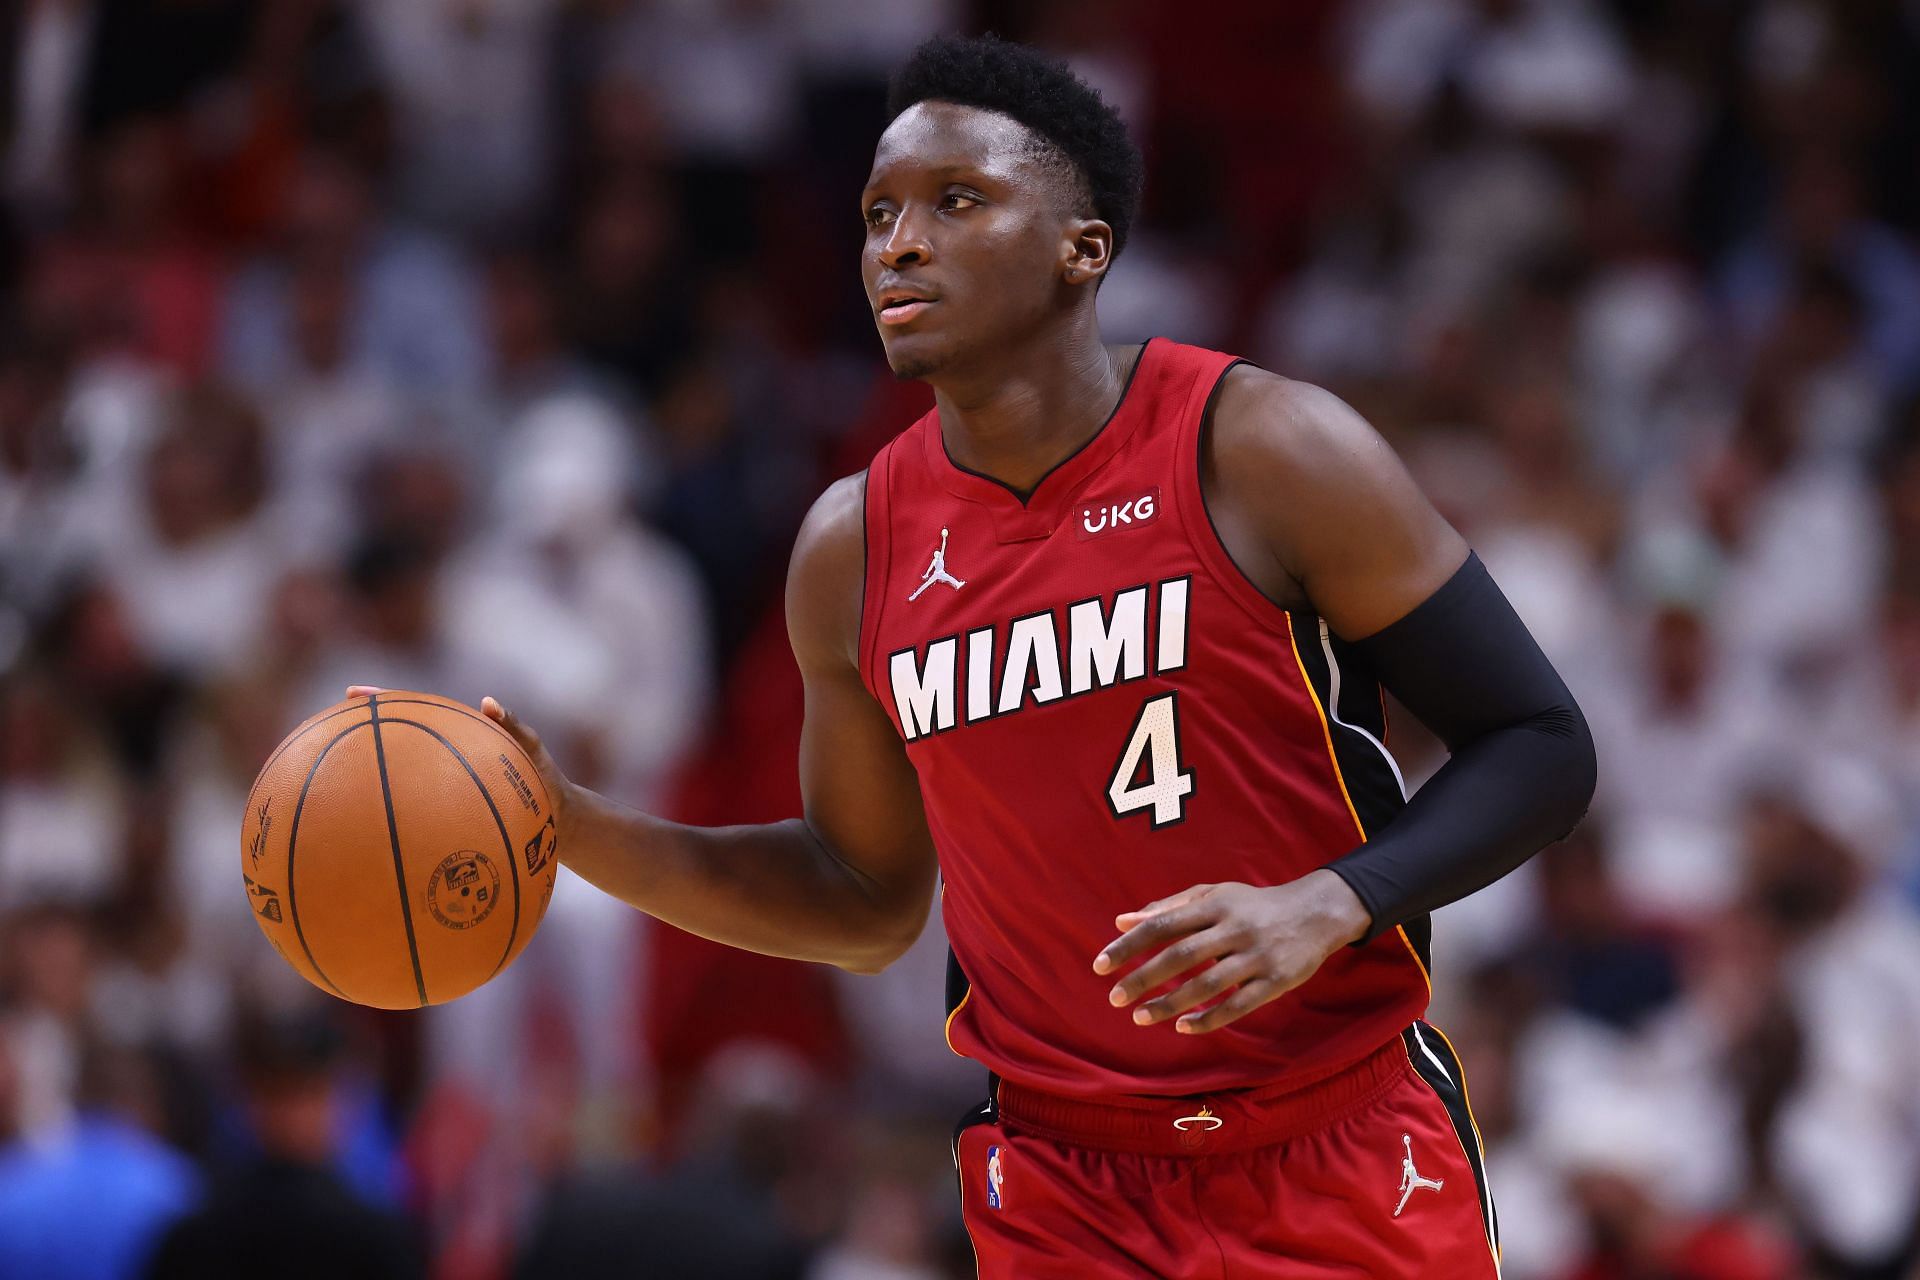 Victor Oladipo is a two-time NBA All-Star.